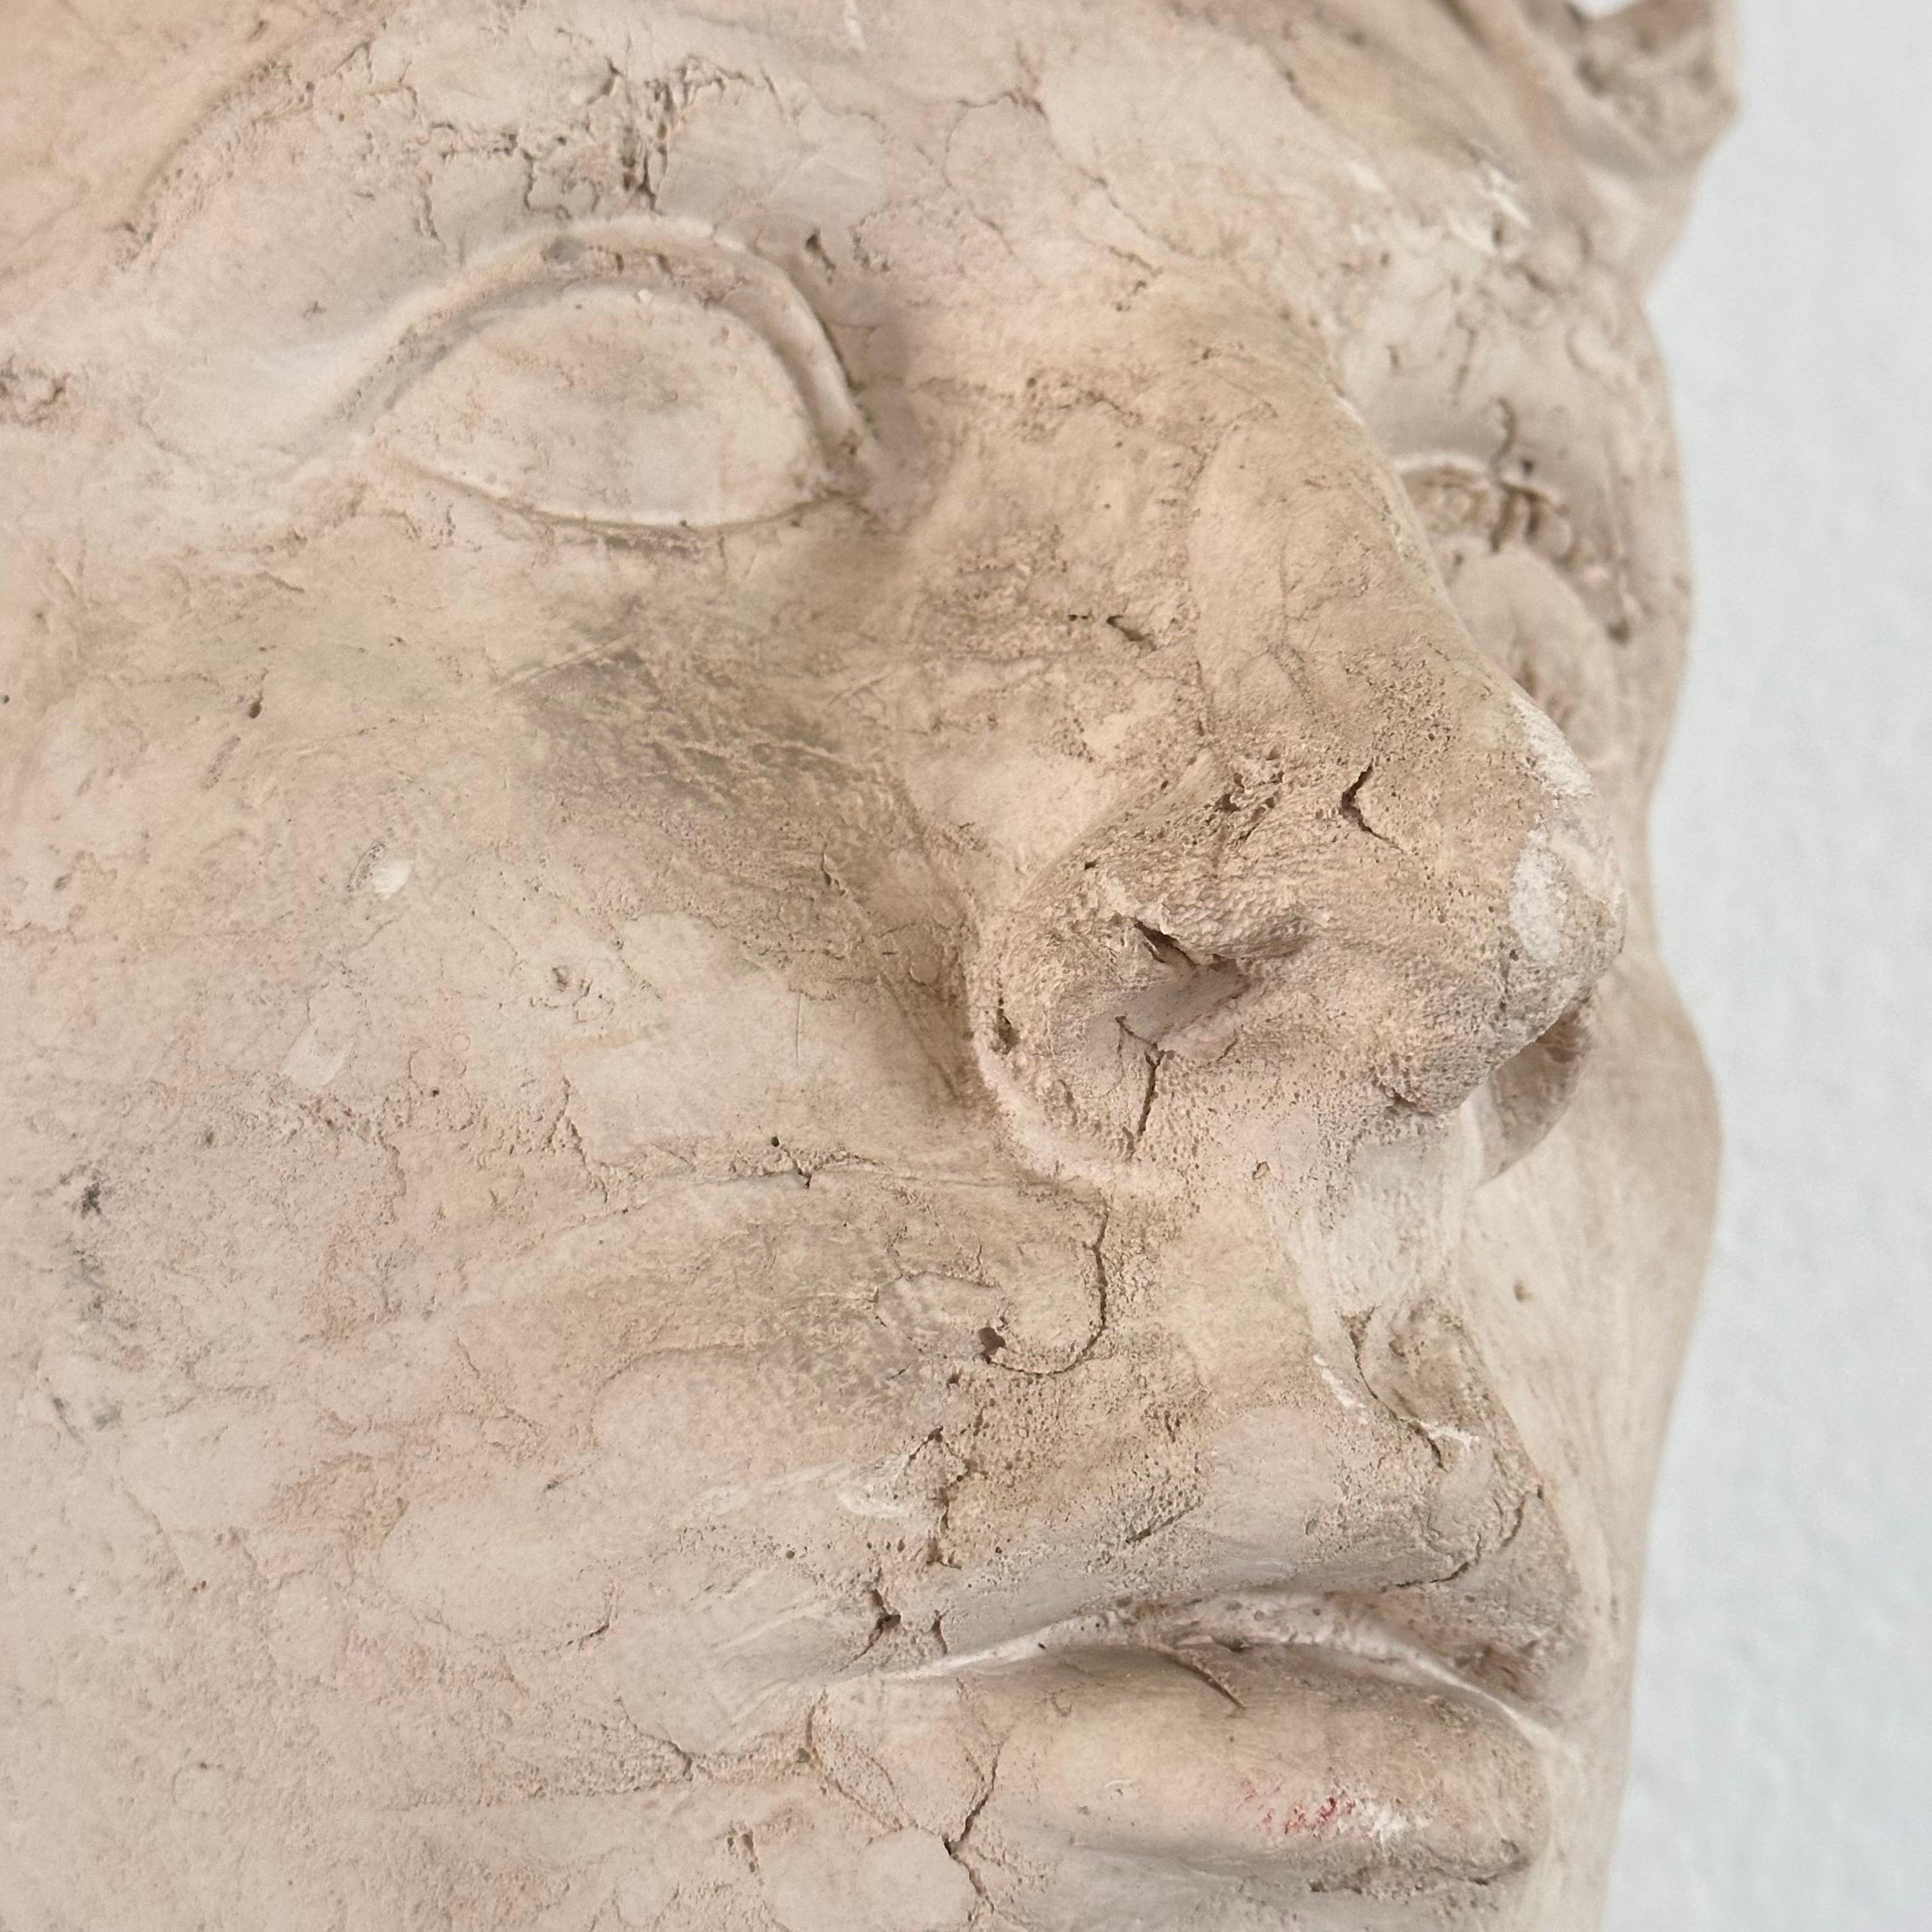 Stunning Decorative Roman Gypsum Face, 1970s Reproduction For Sale 1